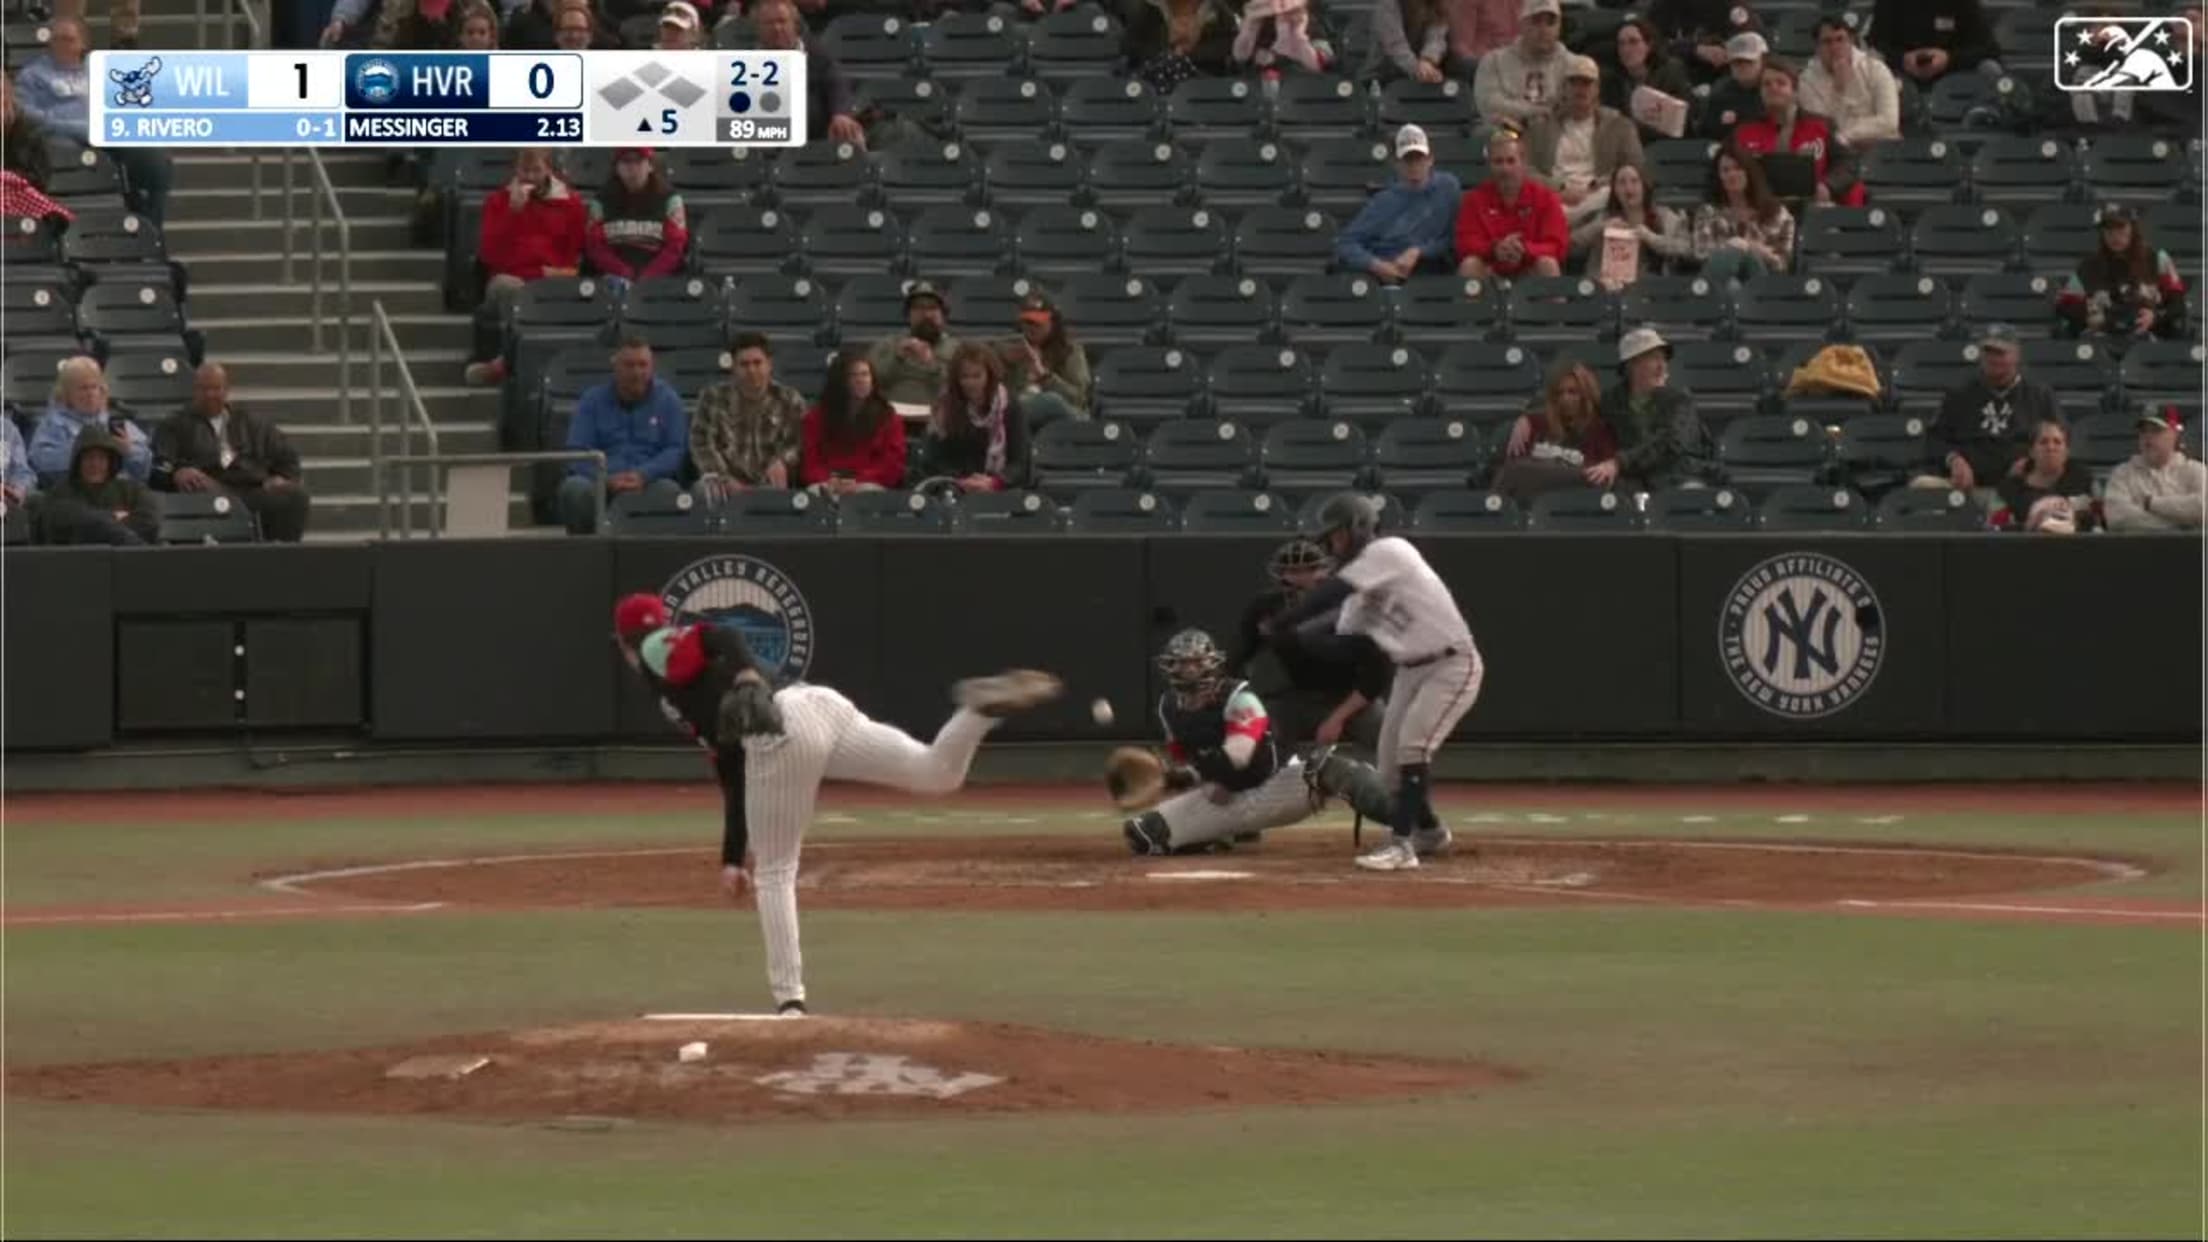 Zach Messinger's fifth strikeout